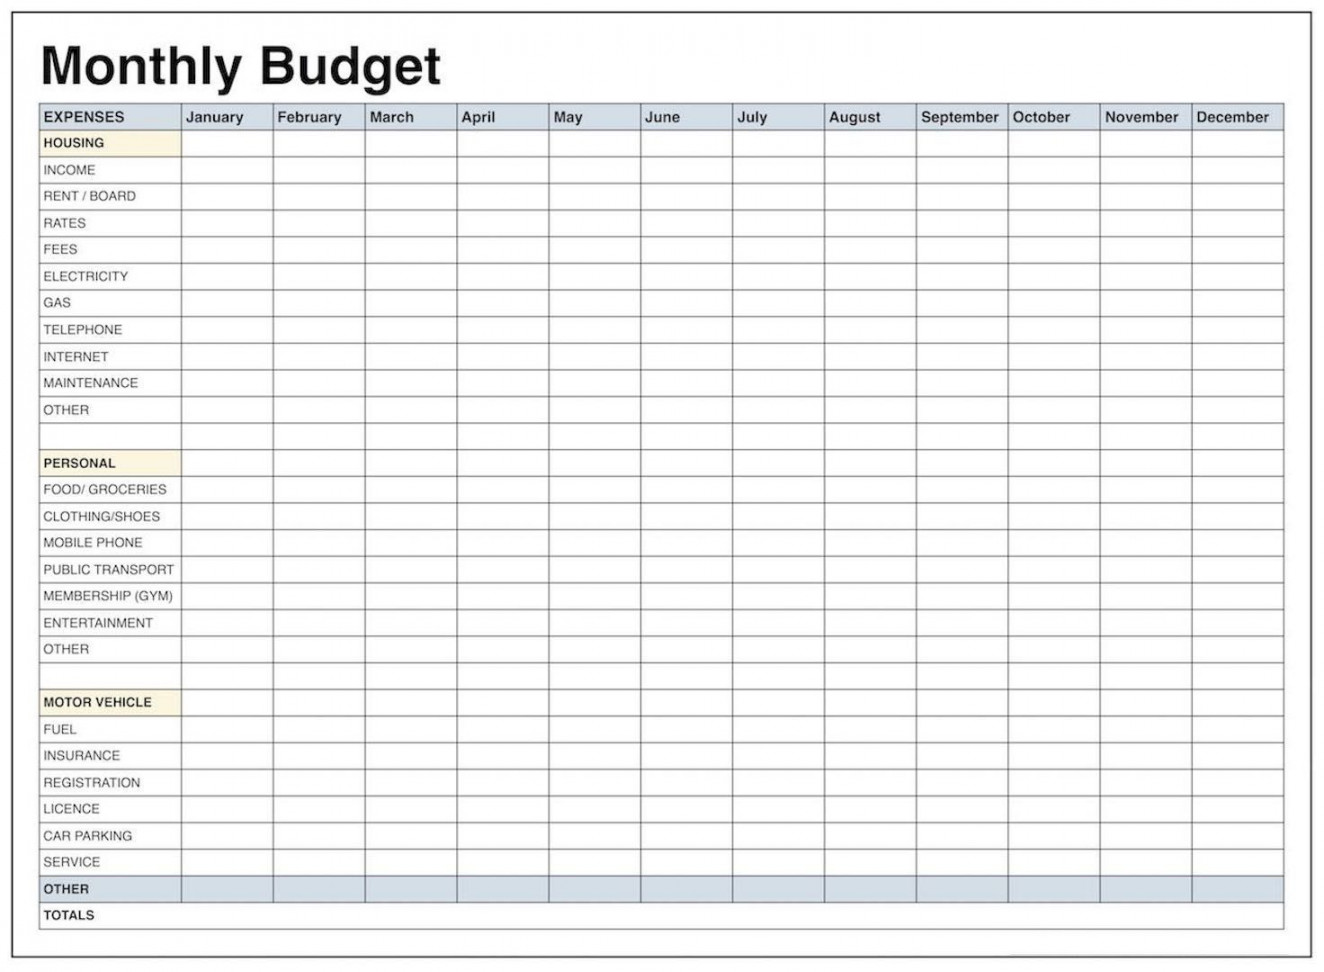 Blank Monthly Budget Template Pdf http://templatedocs